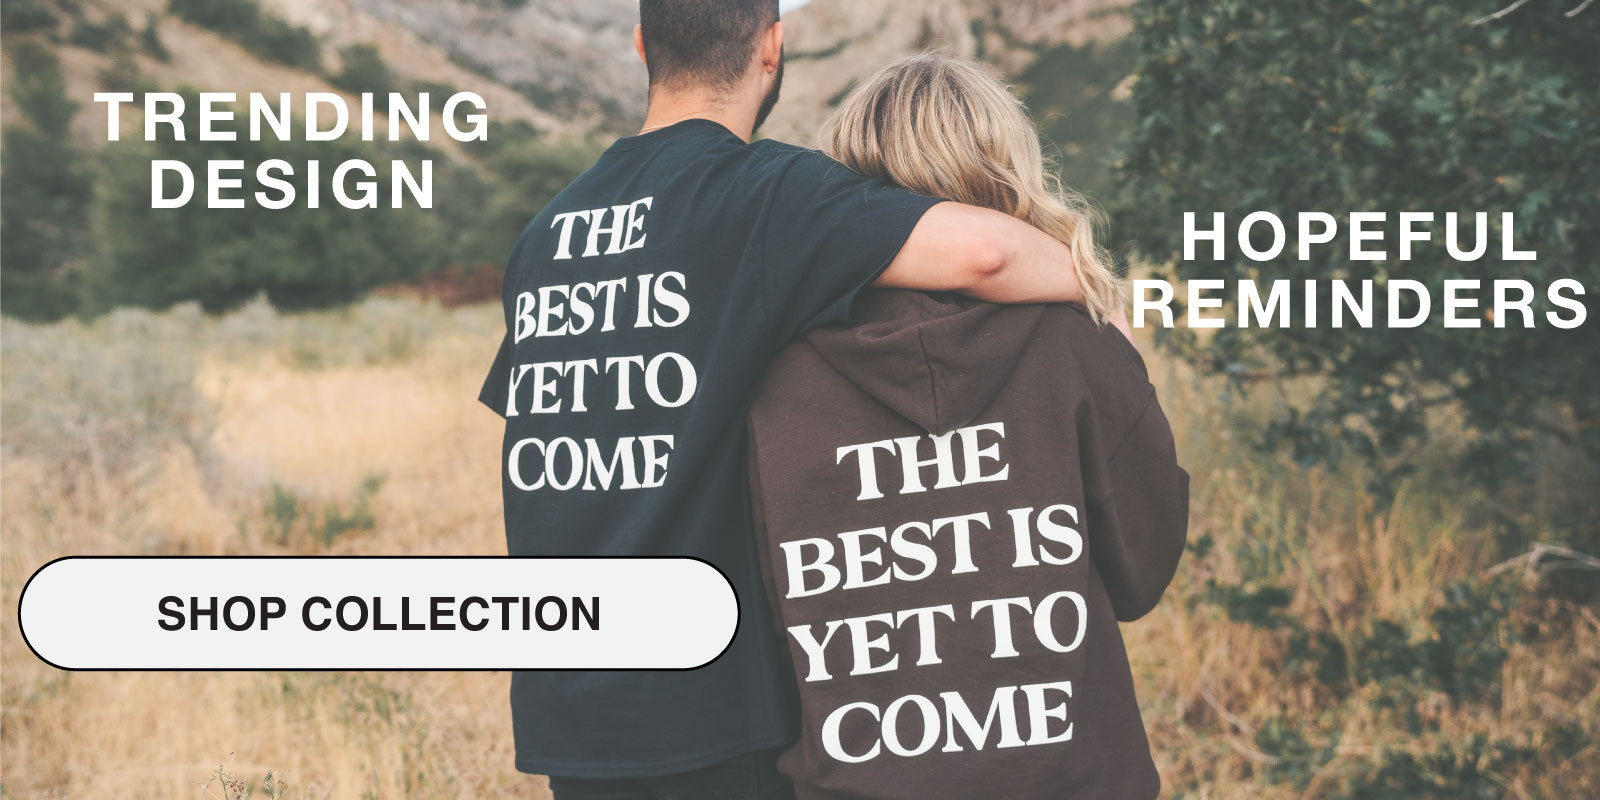 The Best Is Yet To Come - SHOP COLLECTION